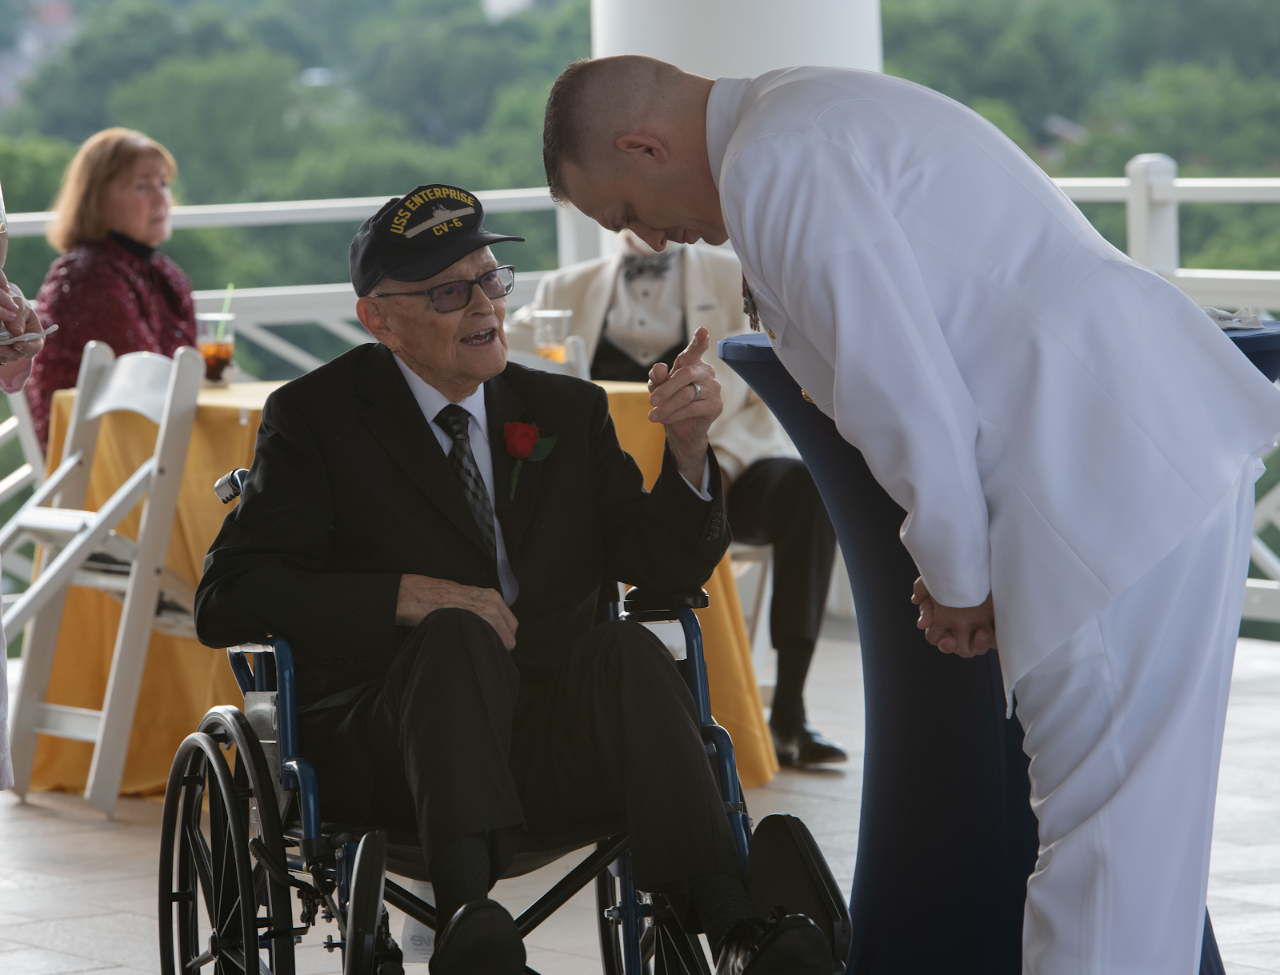 <p>Chief Petty Officer Bill Norberg, a World War II veteran who served during the Battle of Midway, during a commemoration dinner at the Army Navy Country Club in Arlington, Va., June 4.</p>